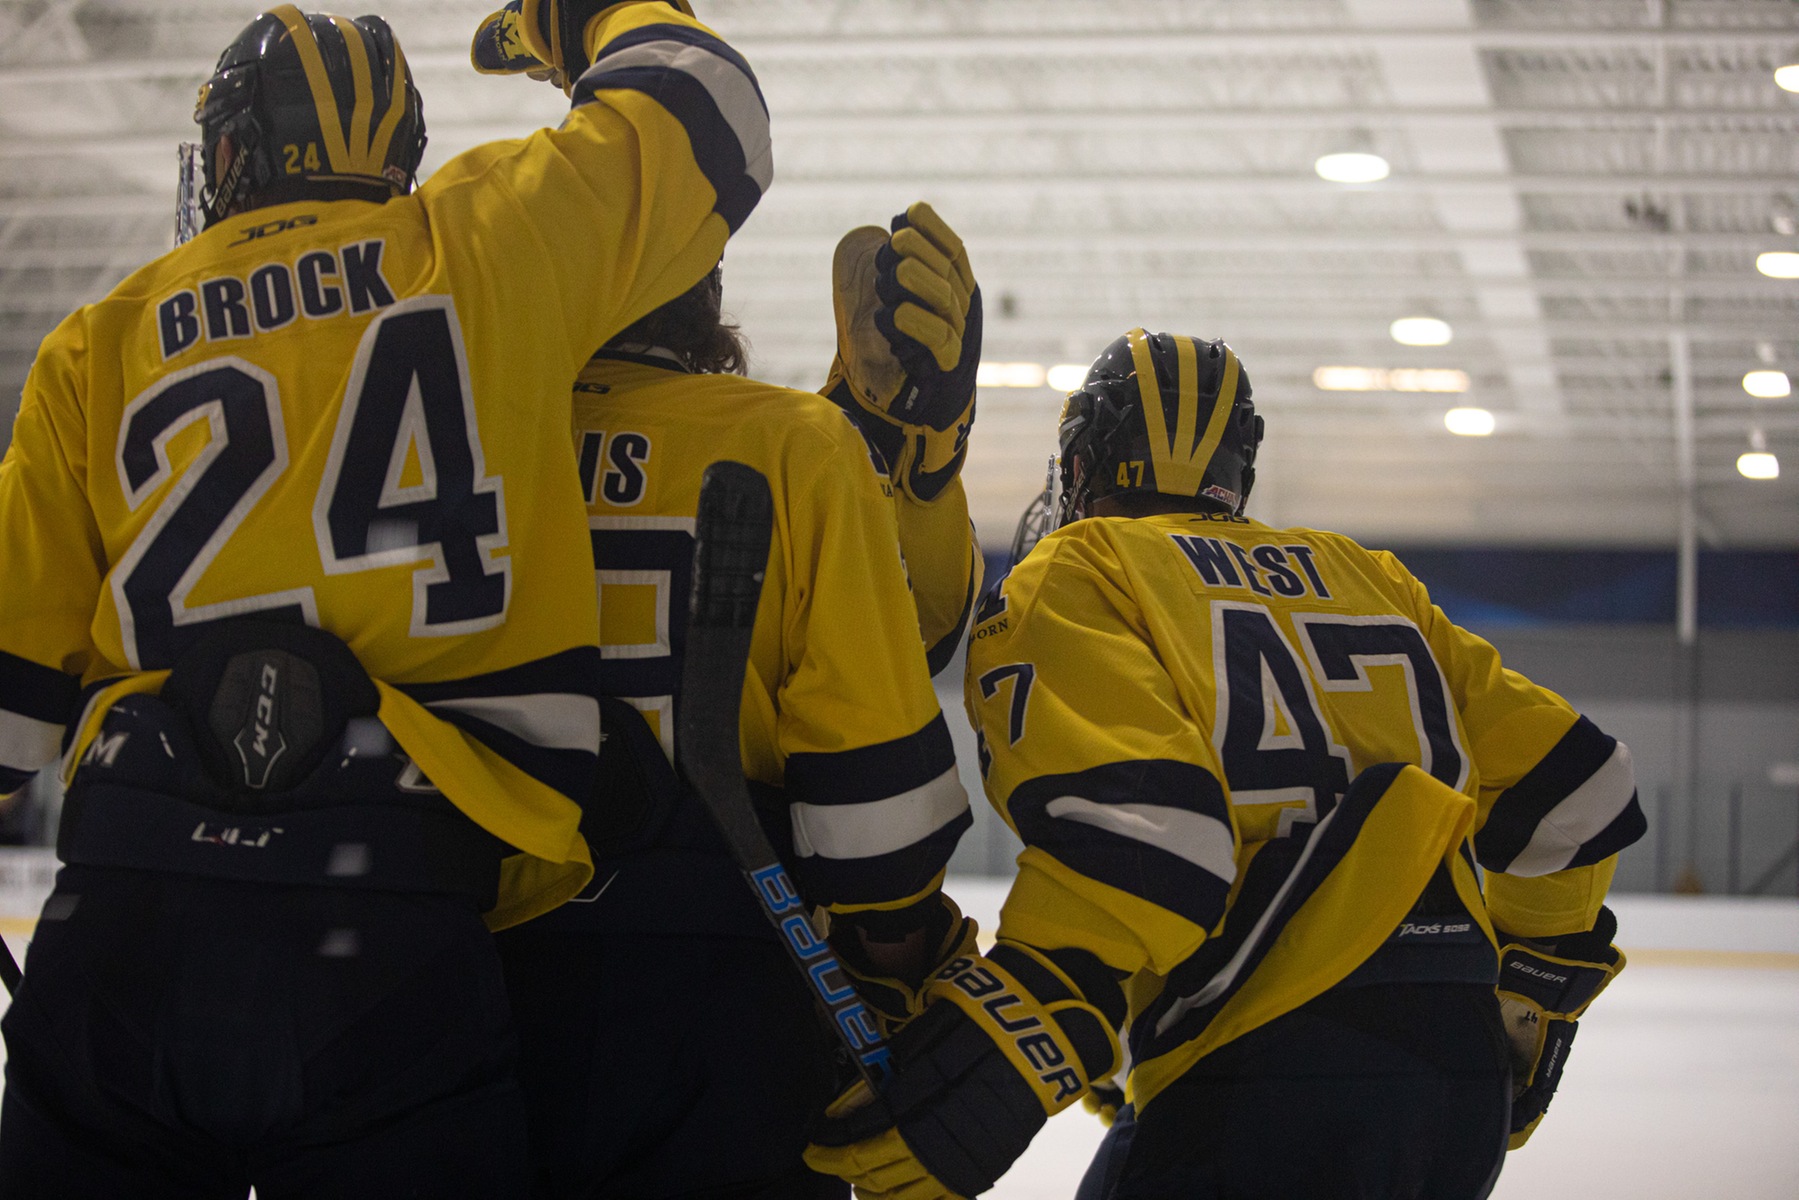 Offense Clicks as Men’s Ice Hockey Sweeps Lawrence Tech